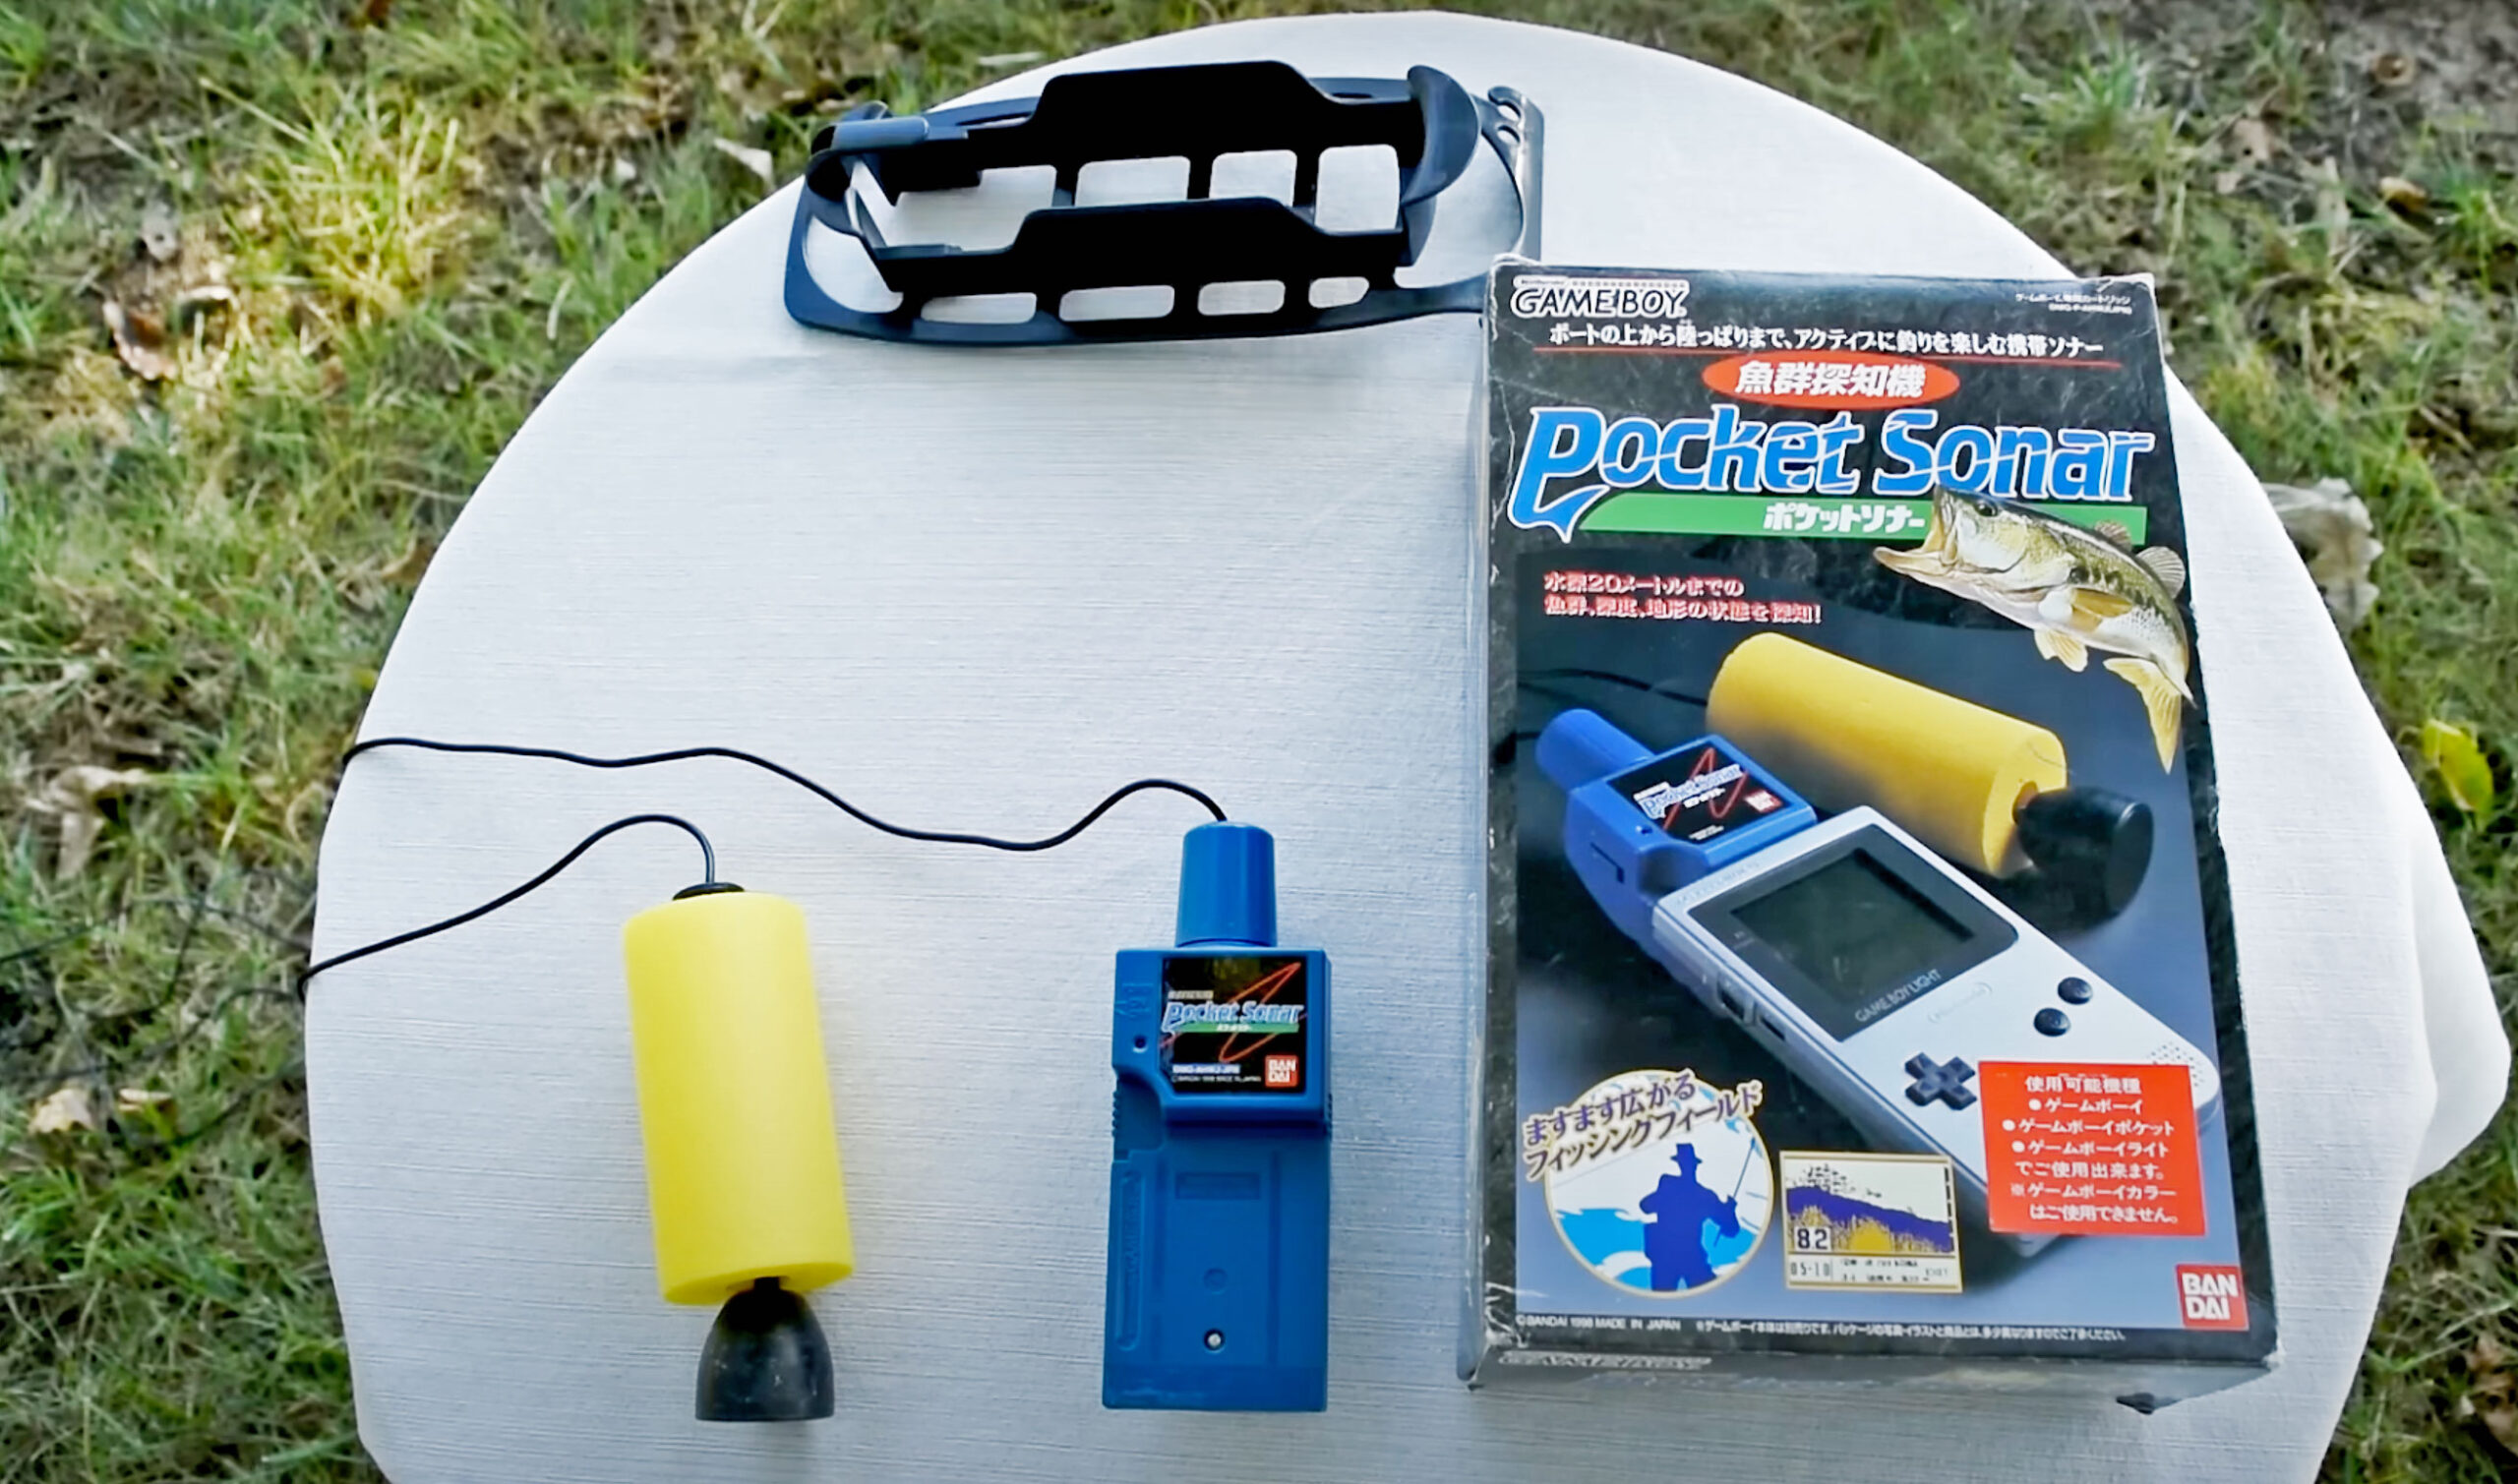 Original Game Boy Was Compatible with Sonar for Fishing?